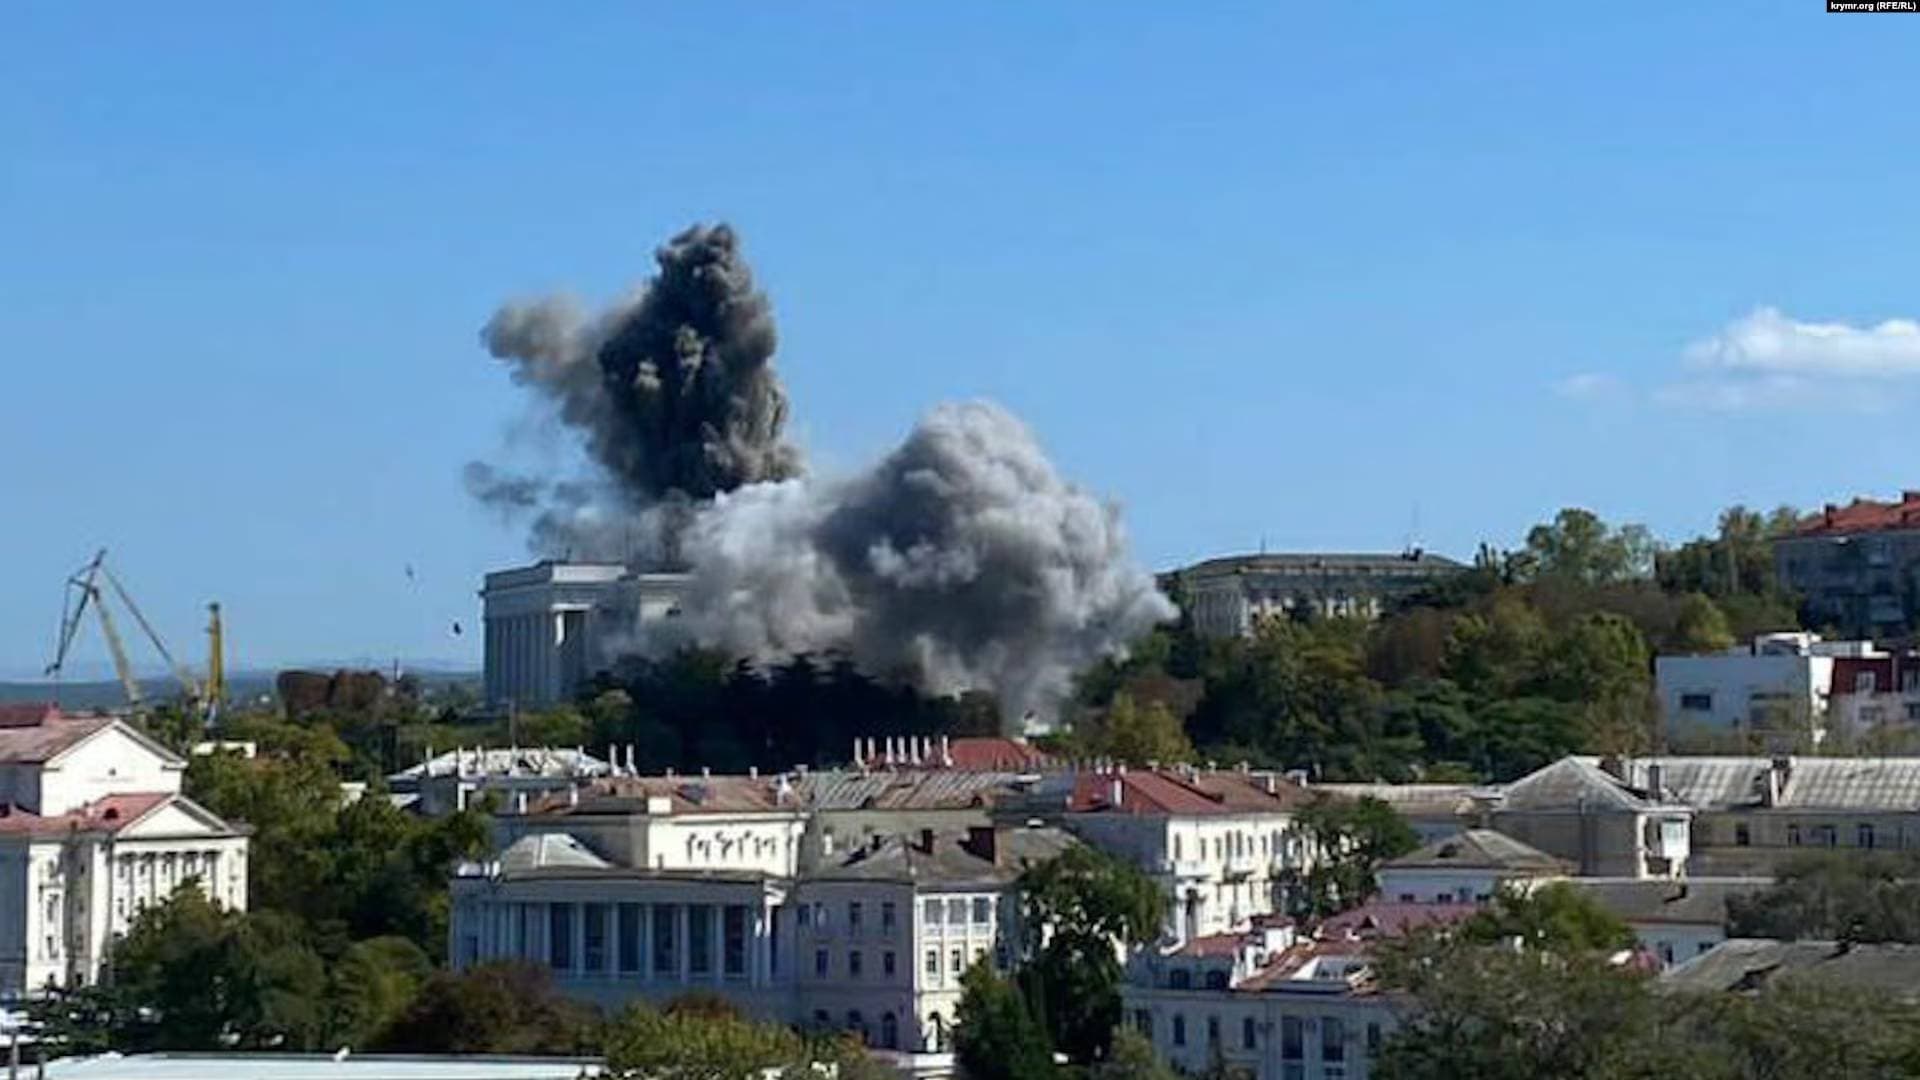 A satellite image shows smoke billowing from the Russian Black Sea Navy HQ after a missile strike in Sevastopol